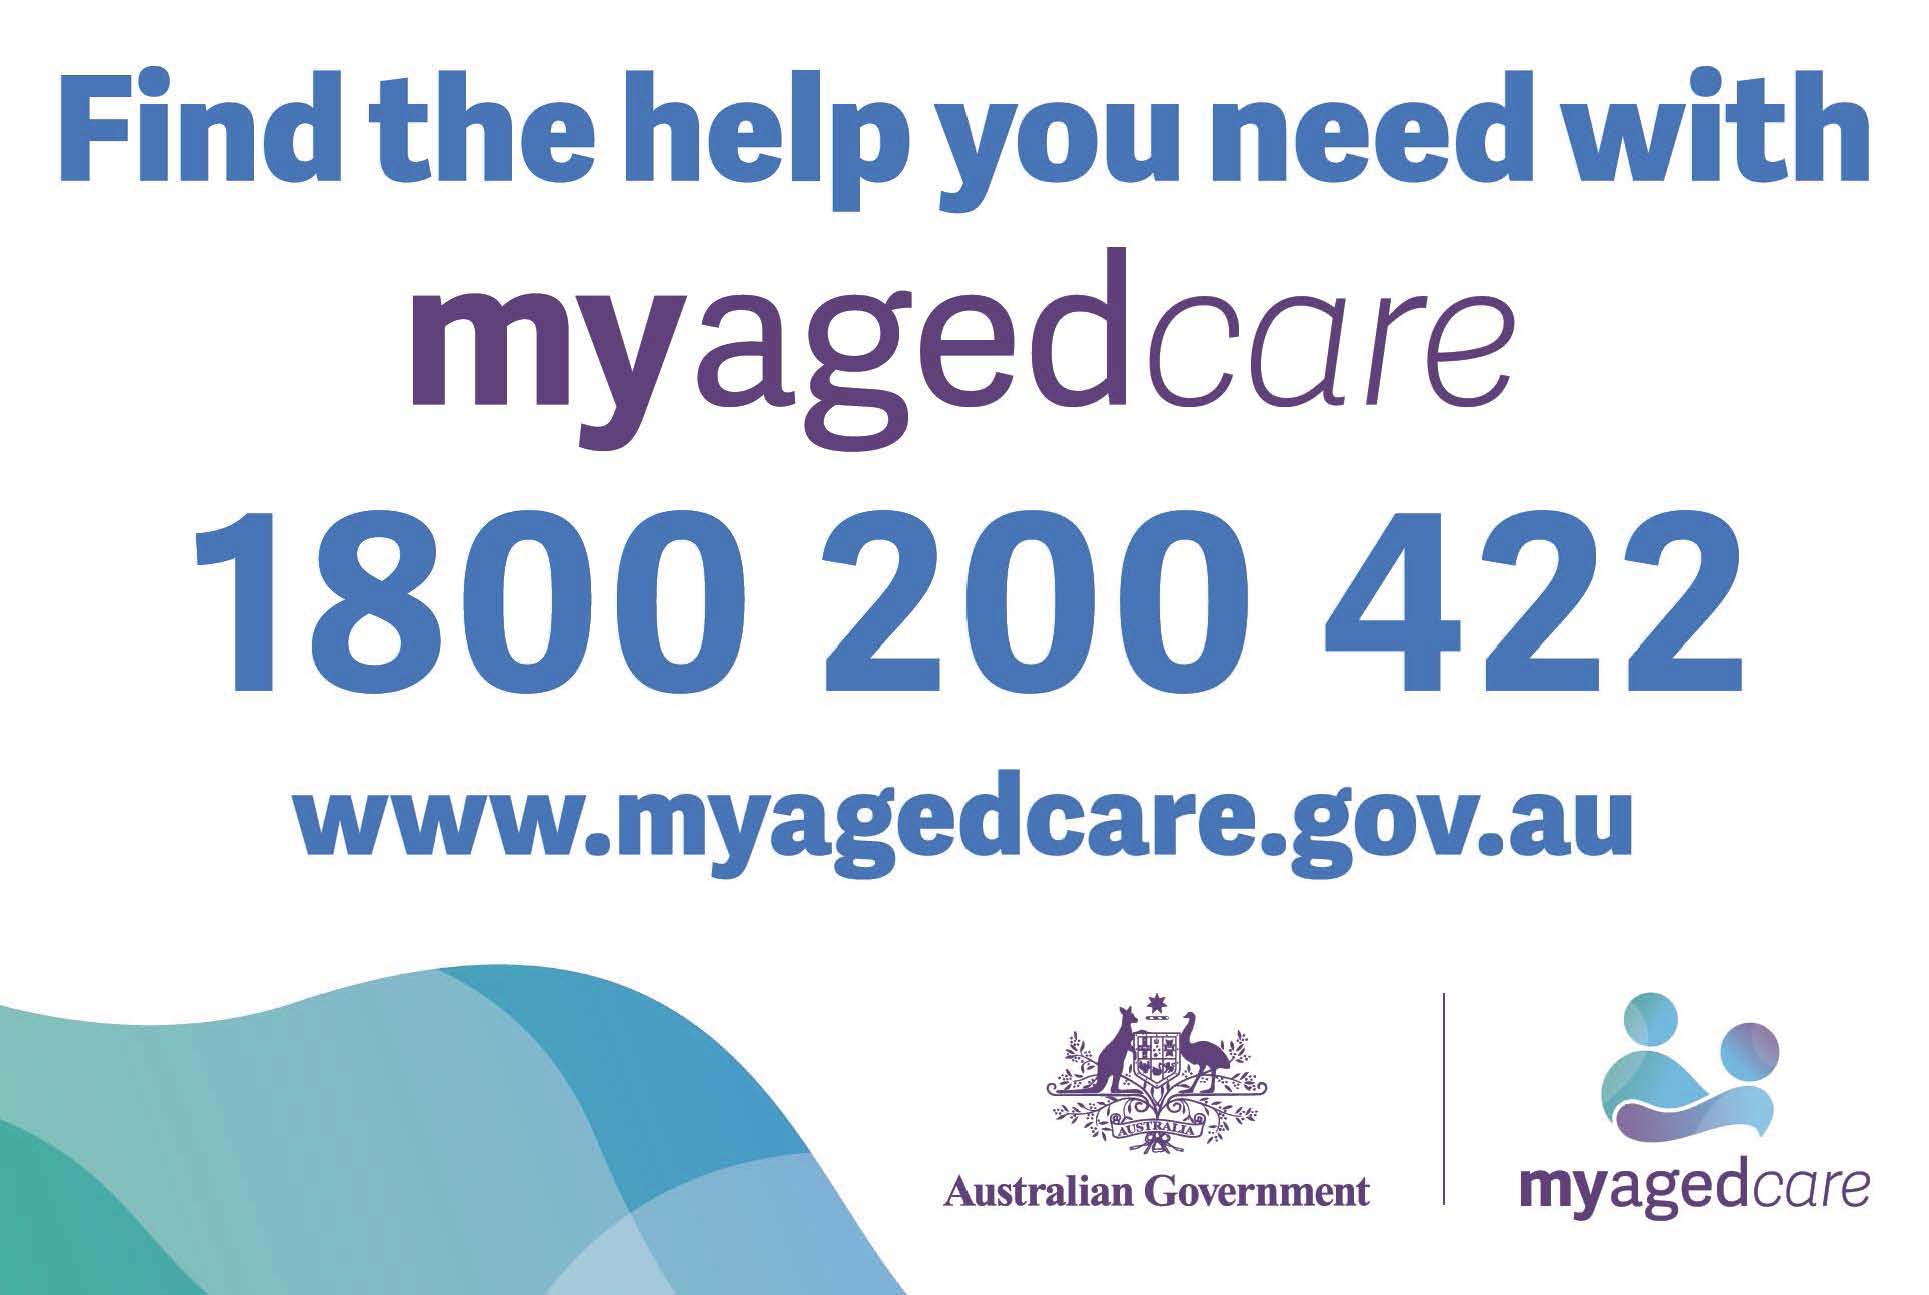 Find the help you need with MyAgedCare: 1800 200 422; www.myagedcare.gov.au